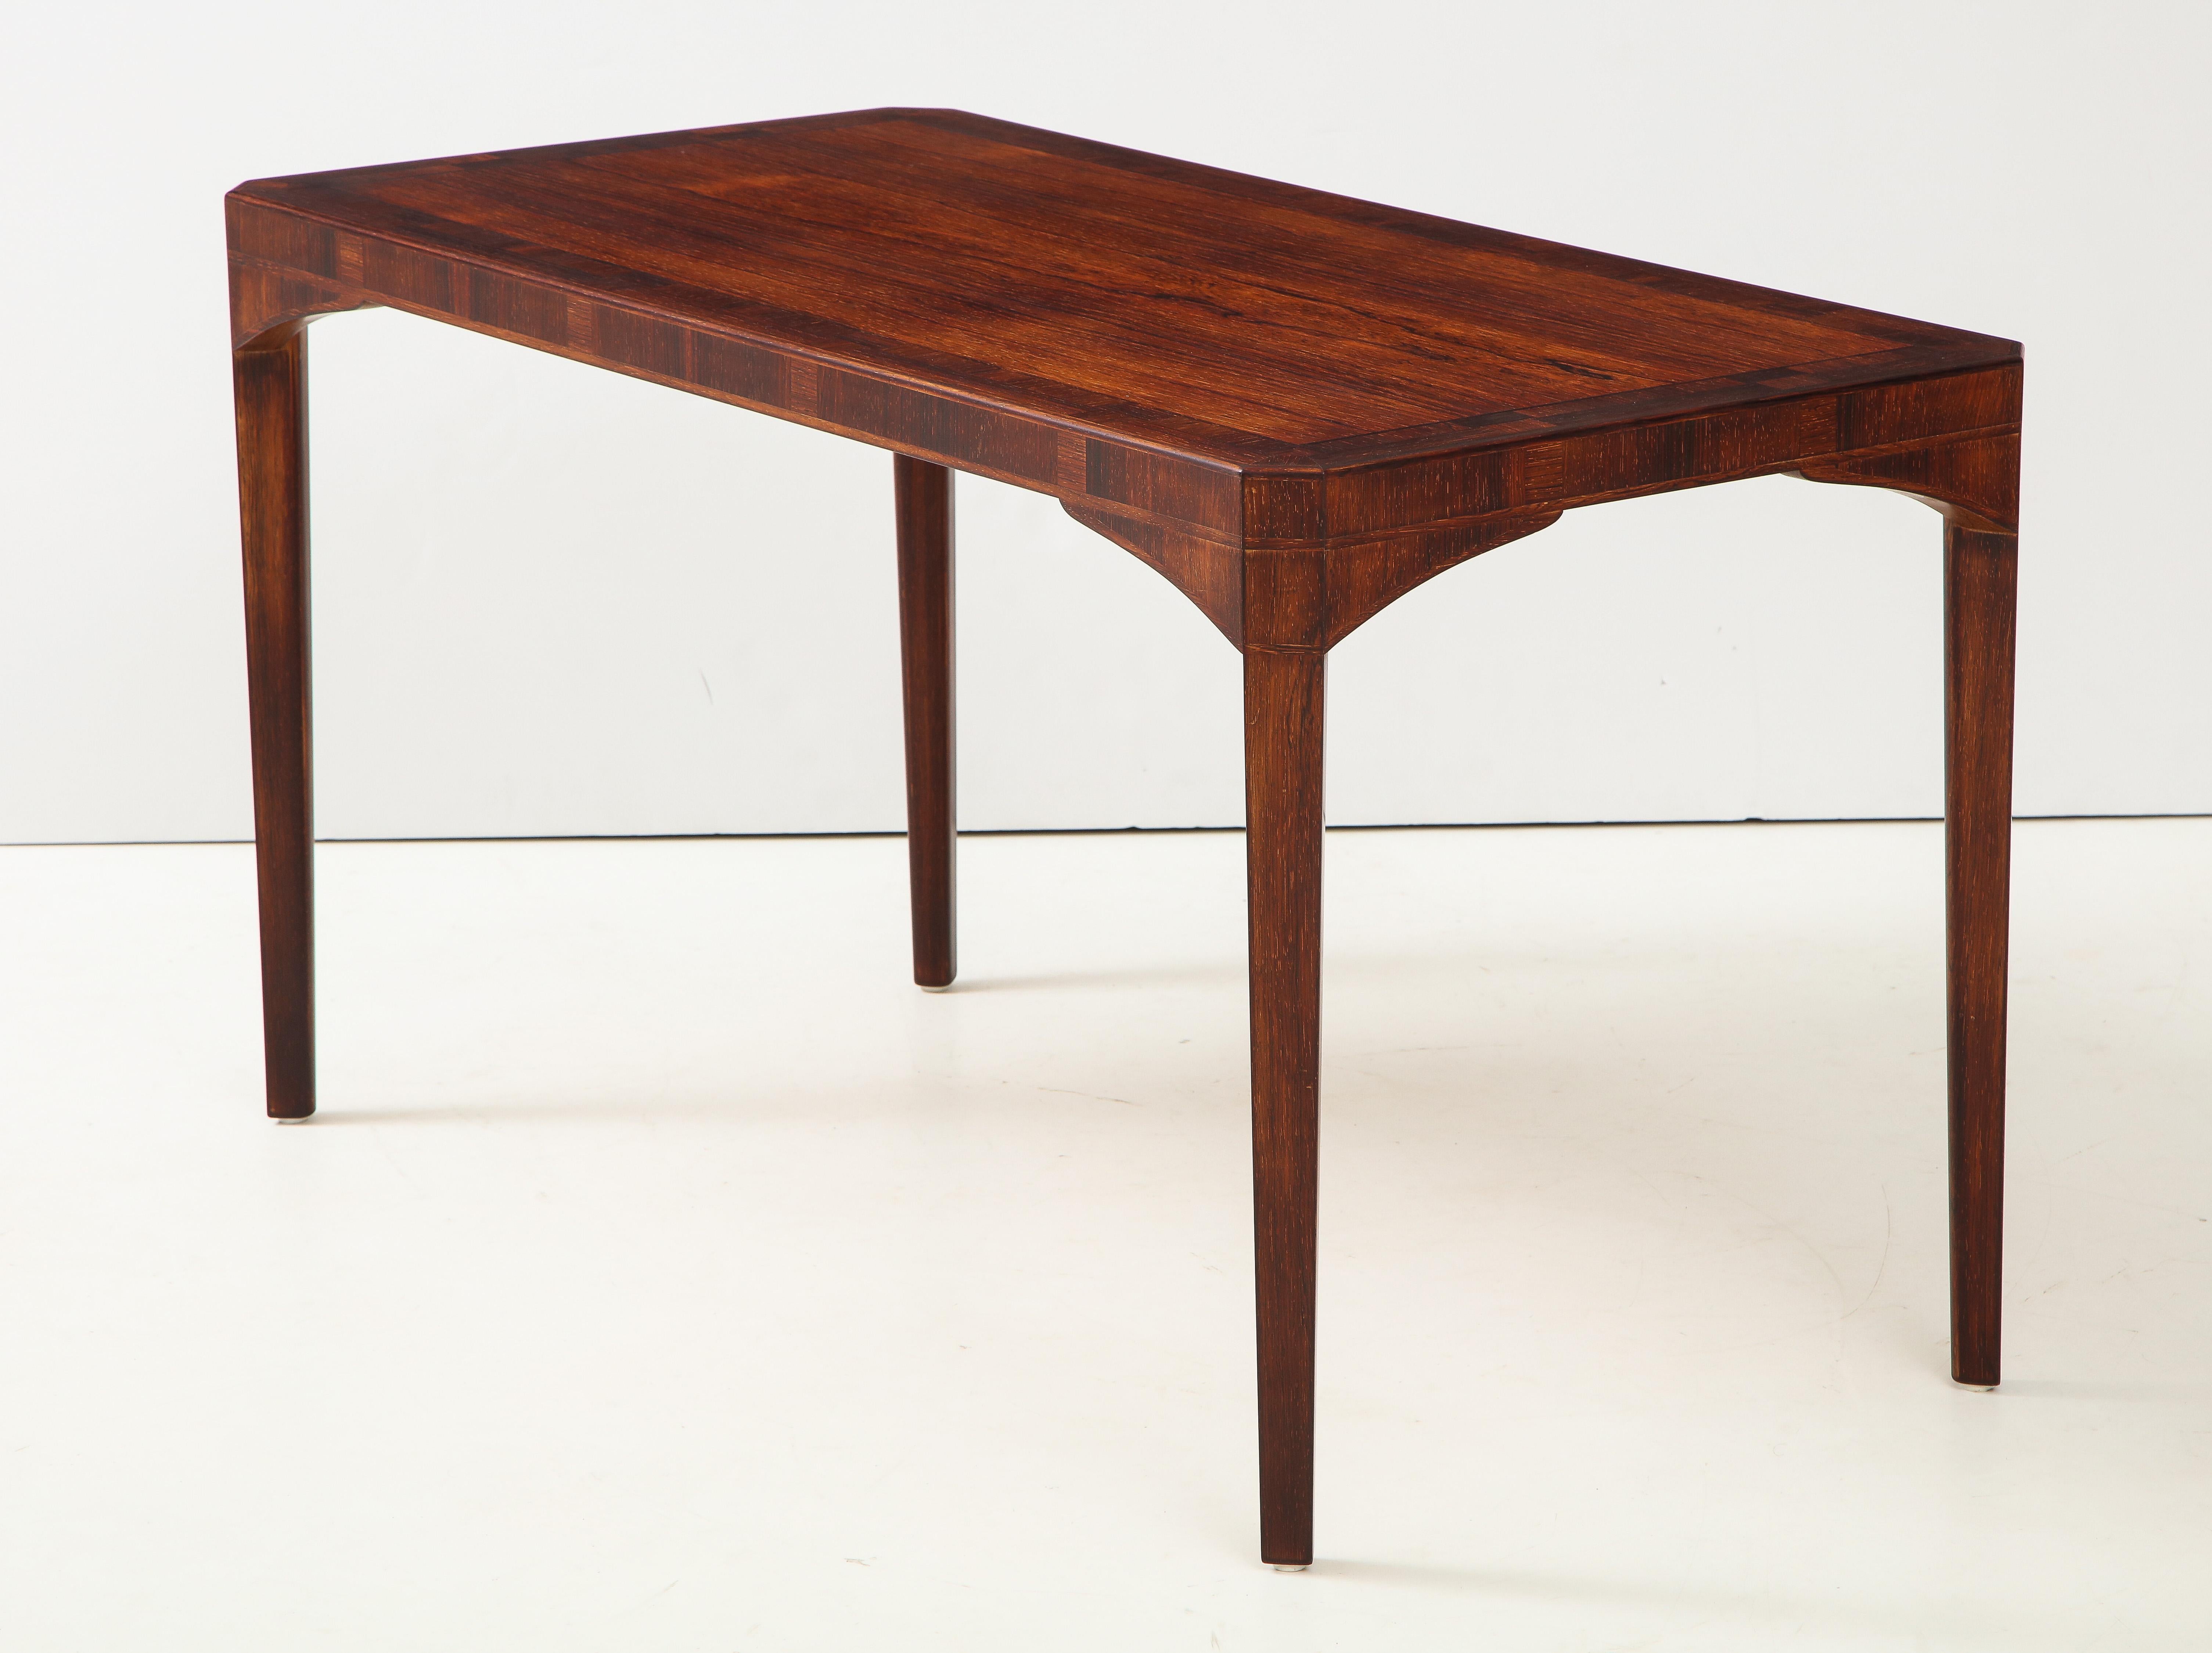 A Swedish rosewood table designed by Carl Malmsten, Stamped on verso with owners name and year, circa 1967. With a rectangular top, geometric inlays and canted corners.